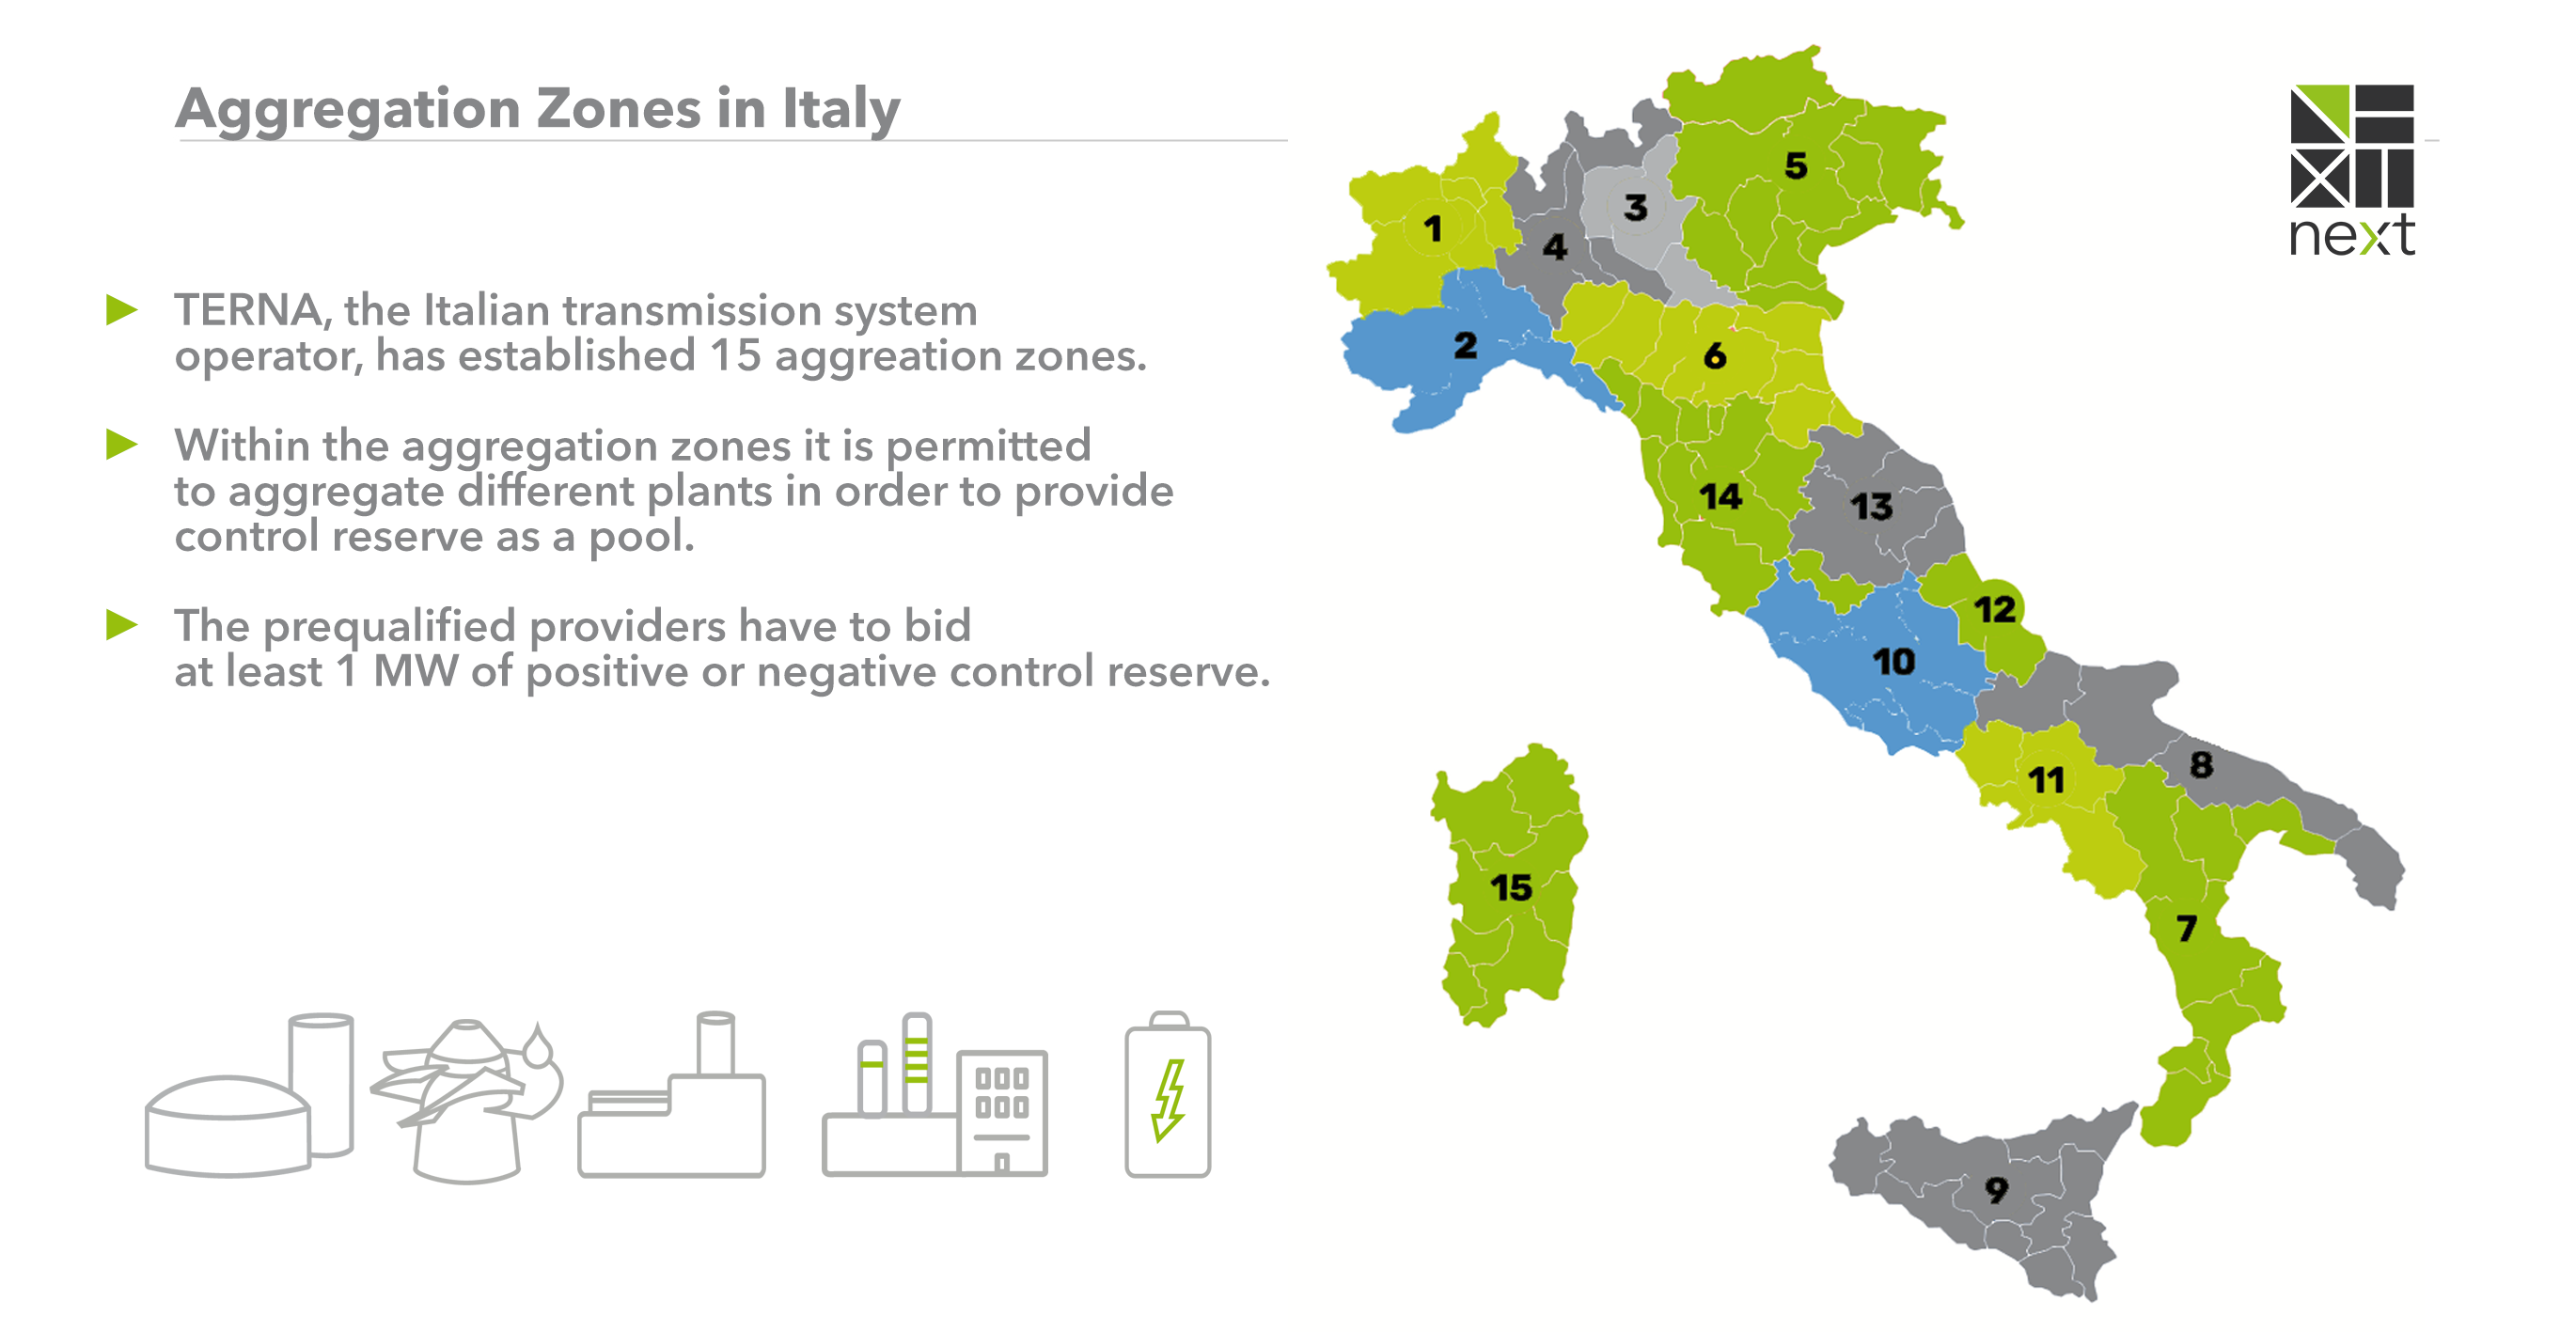 The 15 aggregation zones in Italy